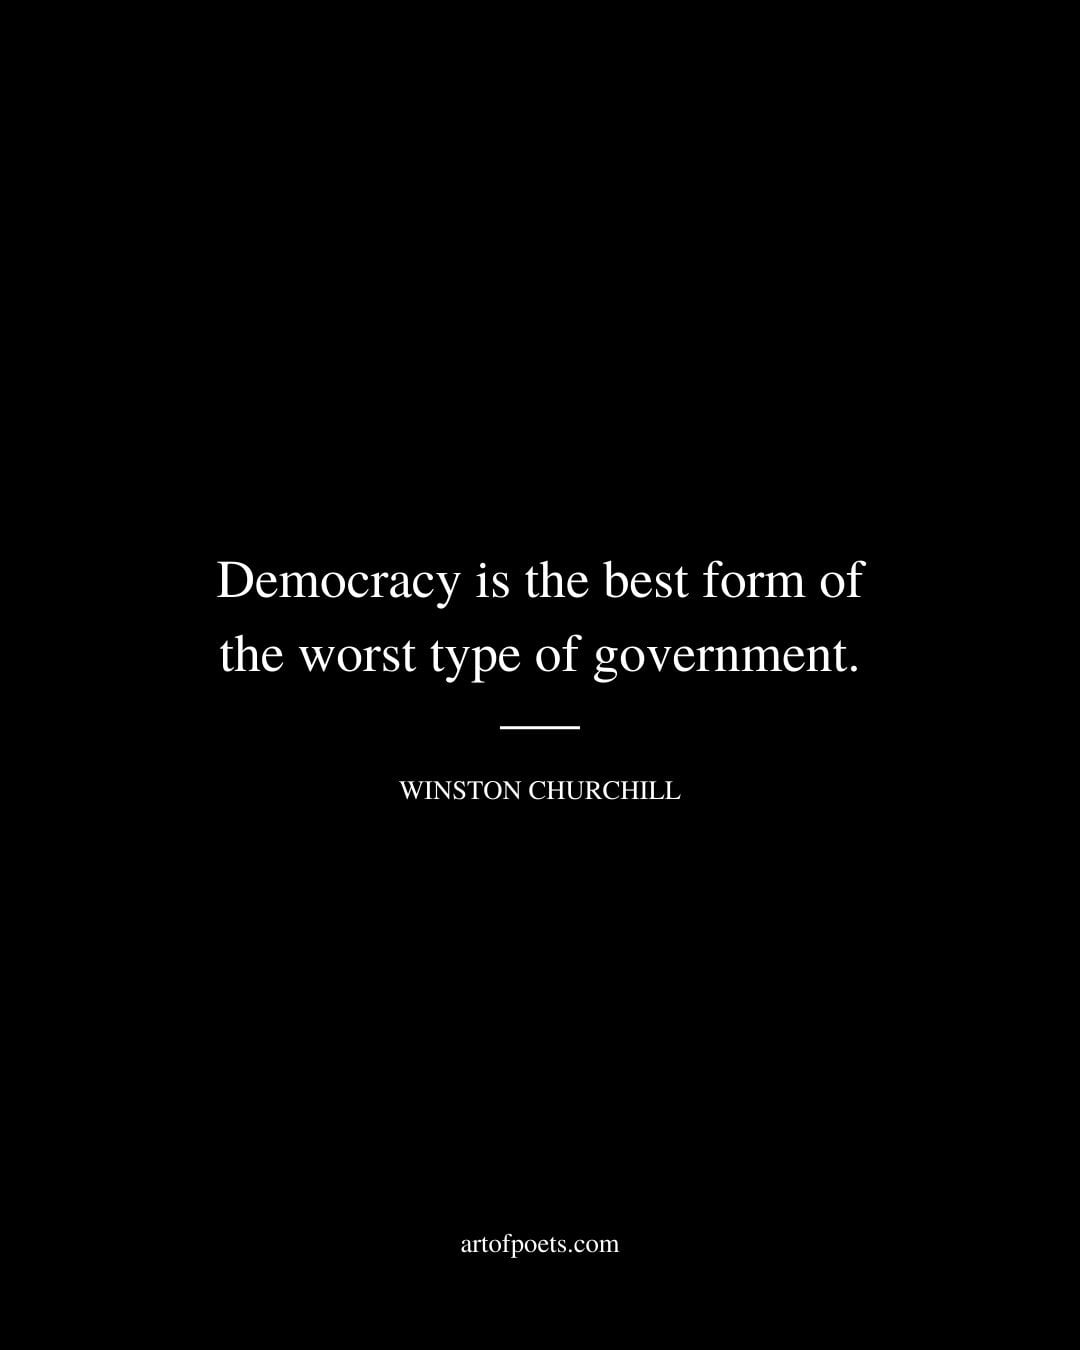 Democracy is the best form of the worst type of government